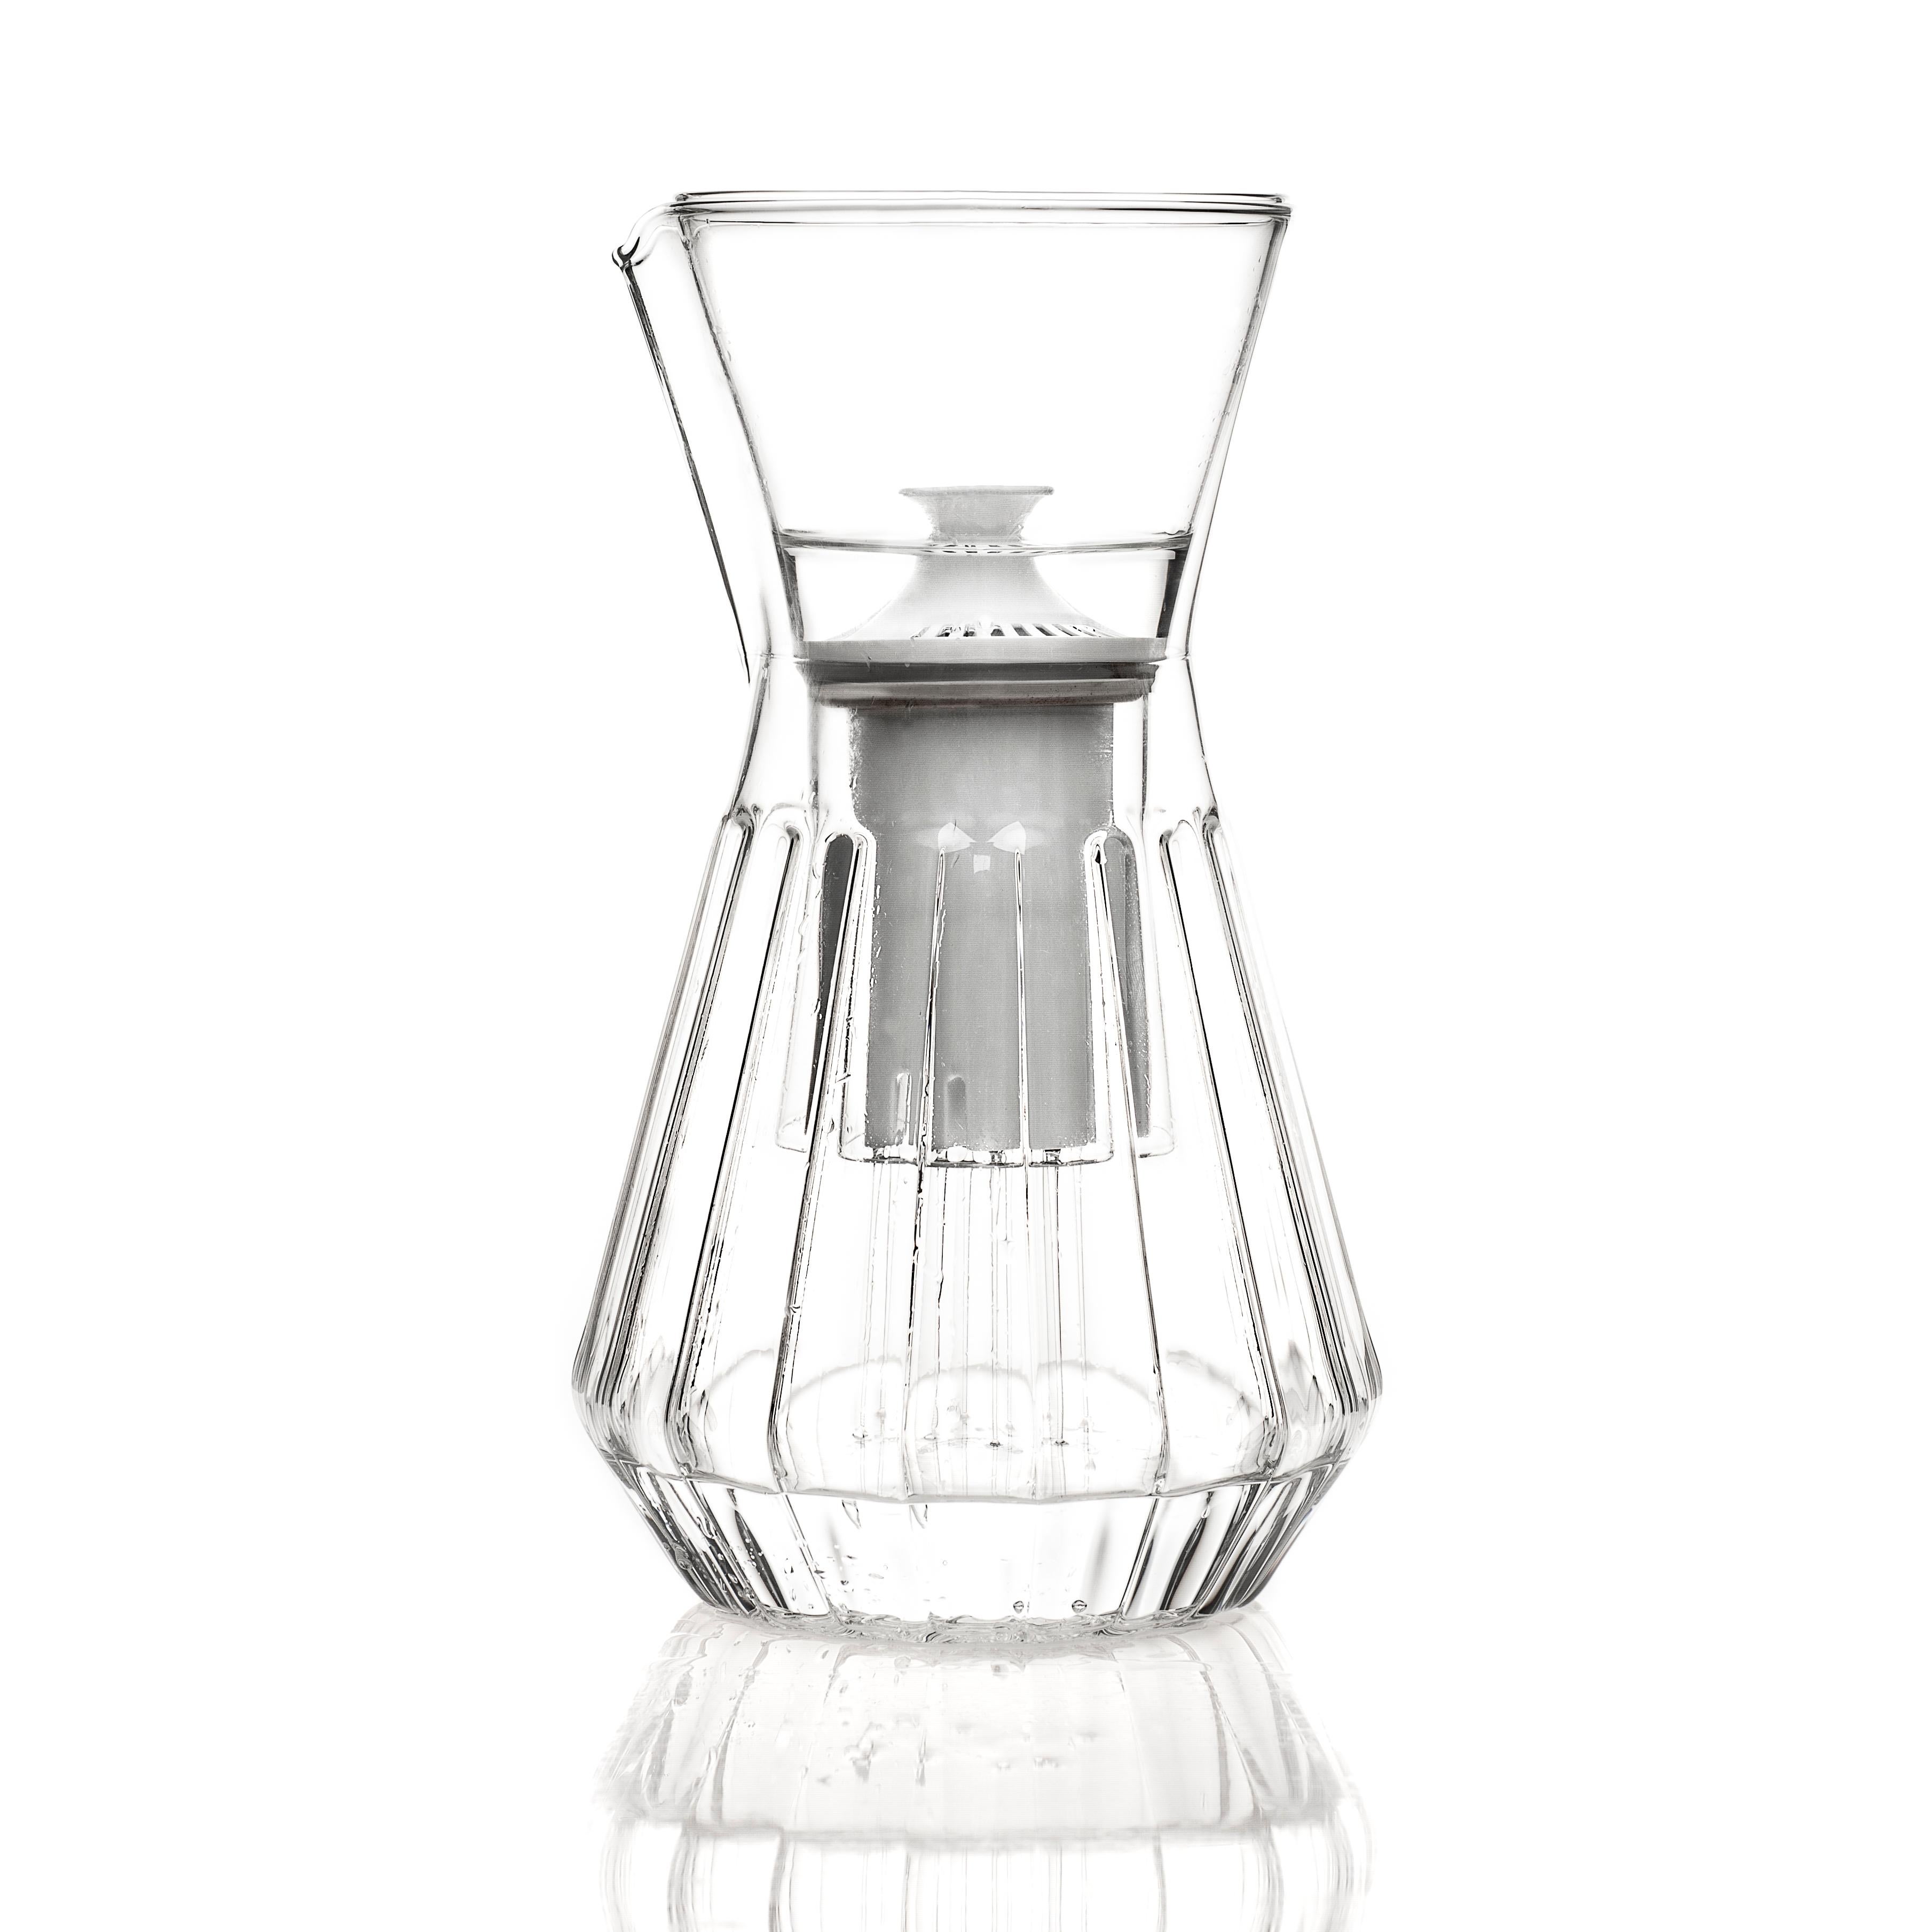 Inspired by the mundane plastic water filter pitcher, the Talise transforms the ubiquitous plastic vessel into an elegant glass carafe, increasing its durability and improving its functionality. When used with the glass funnel, the standard water